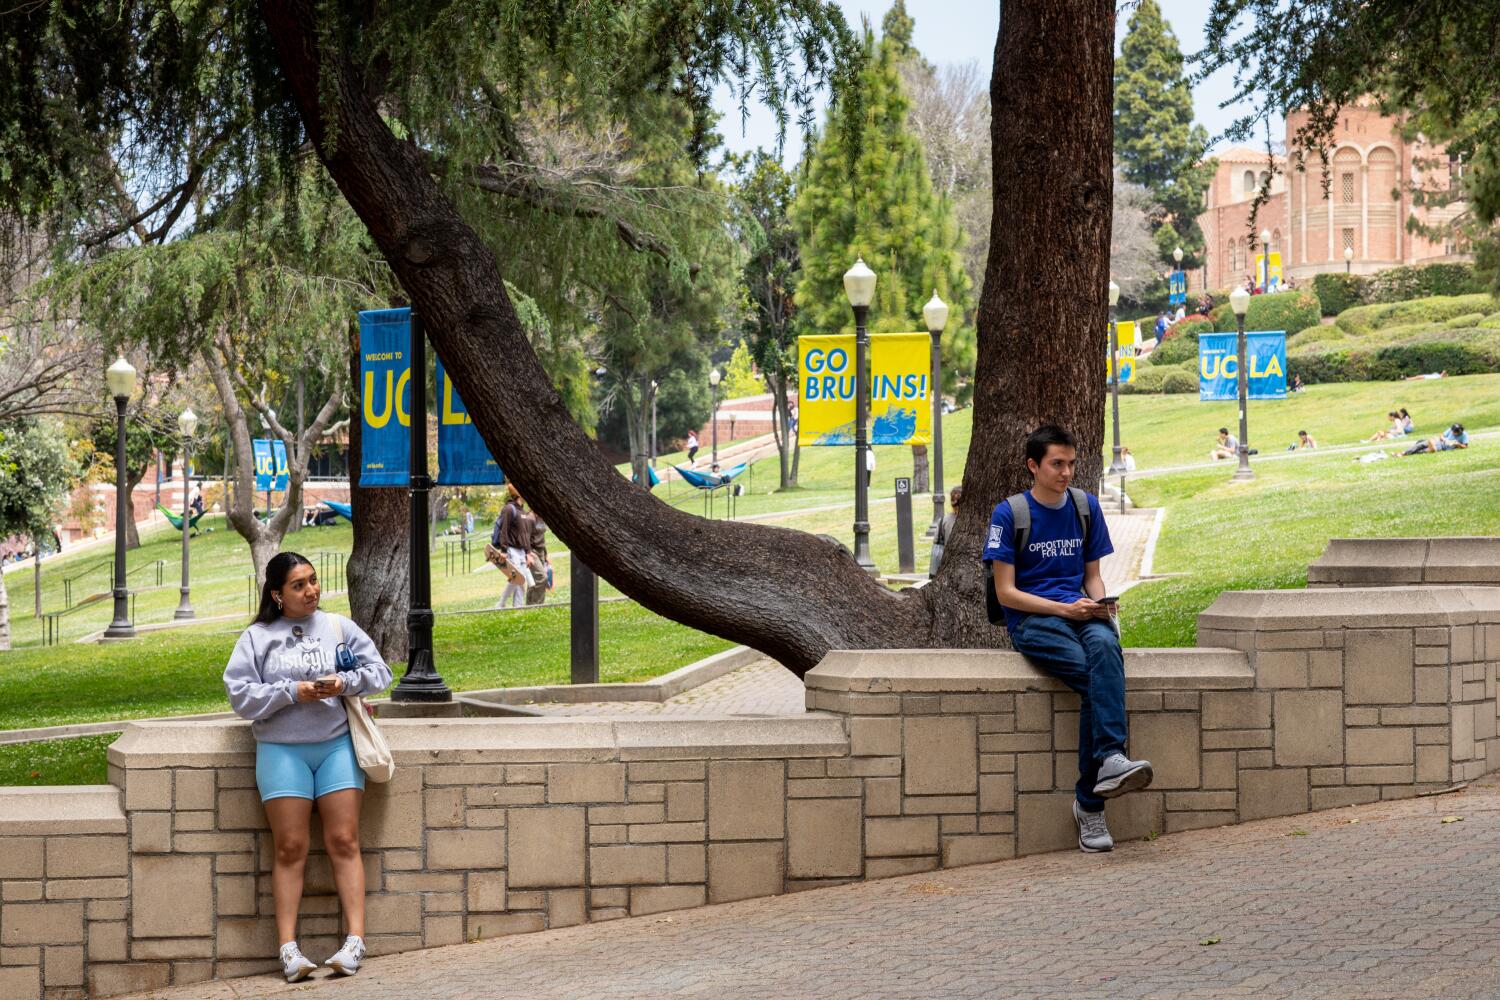 Shooting of UCLA student with a BB gun being investigated as a hate crime